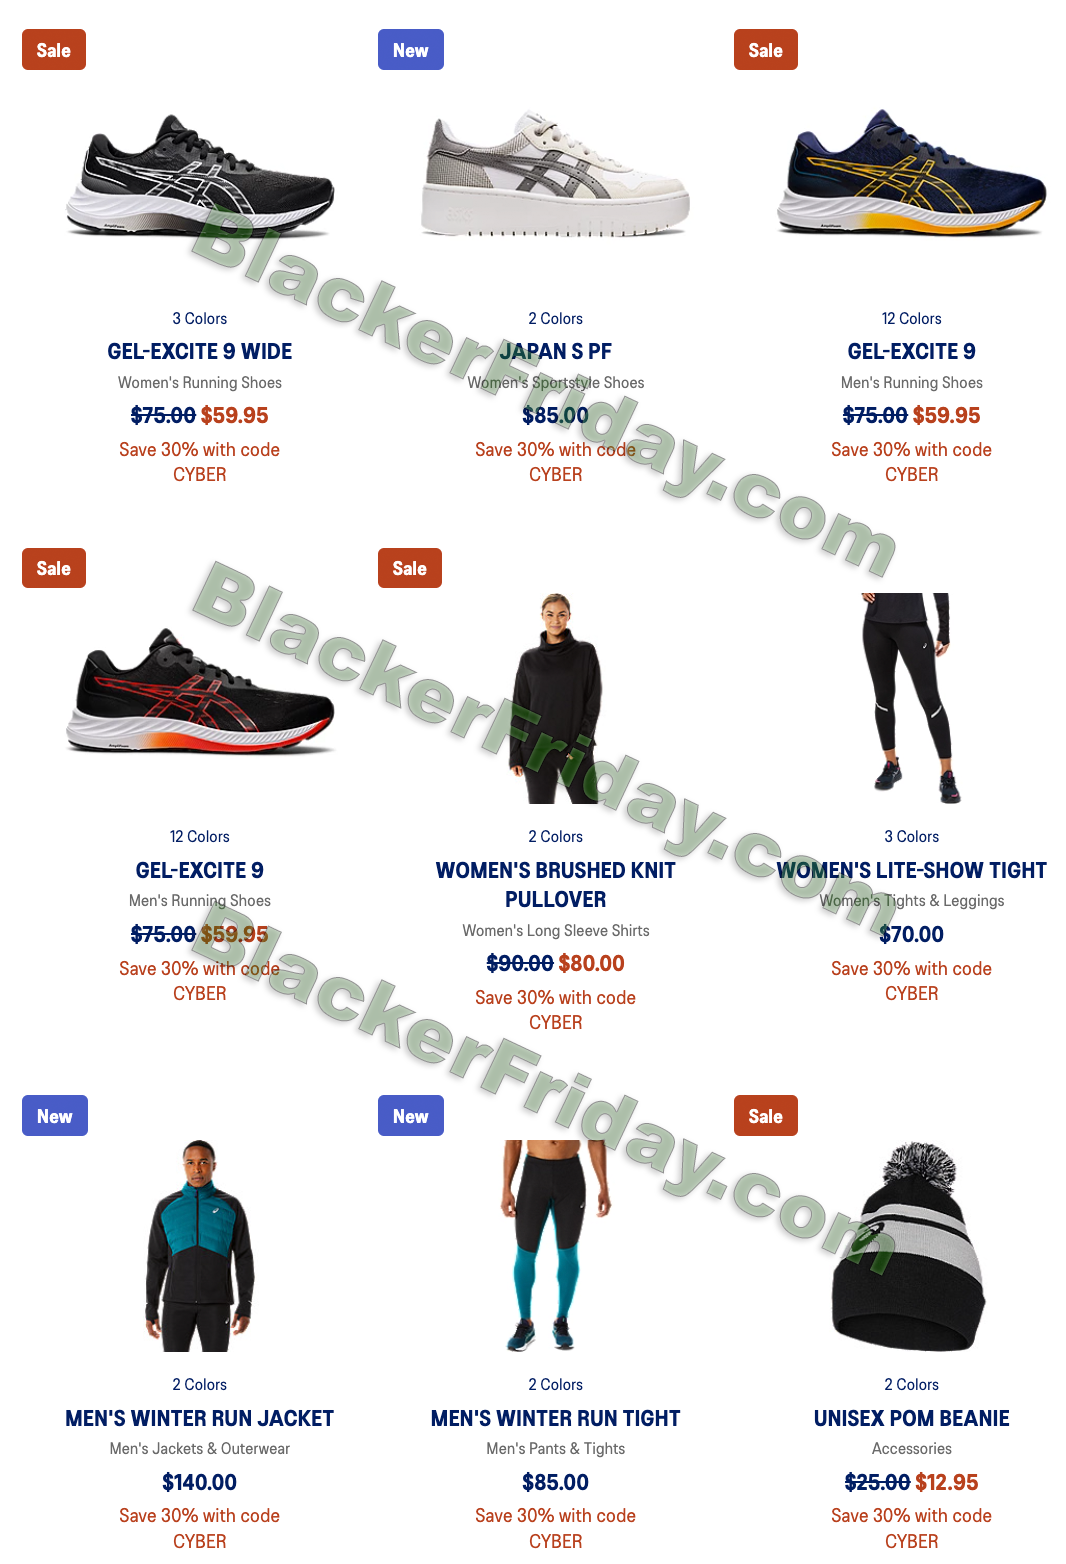 What's expected at ASICS' Cyber Monday 2023 Sale - Blacker Friday